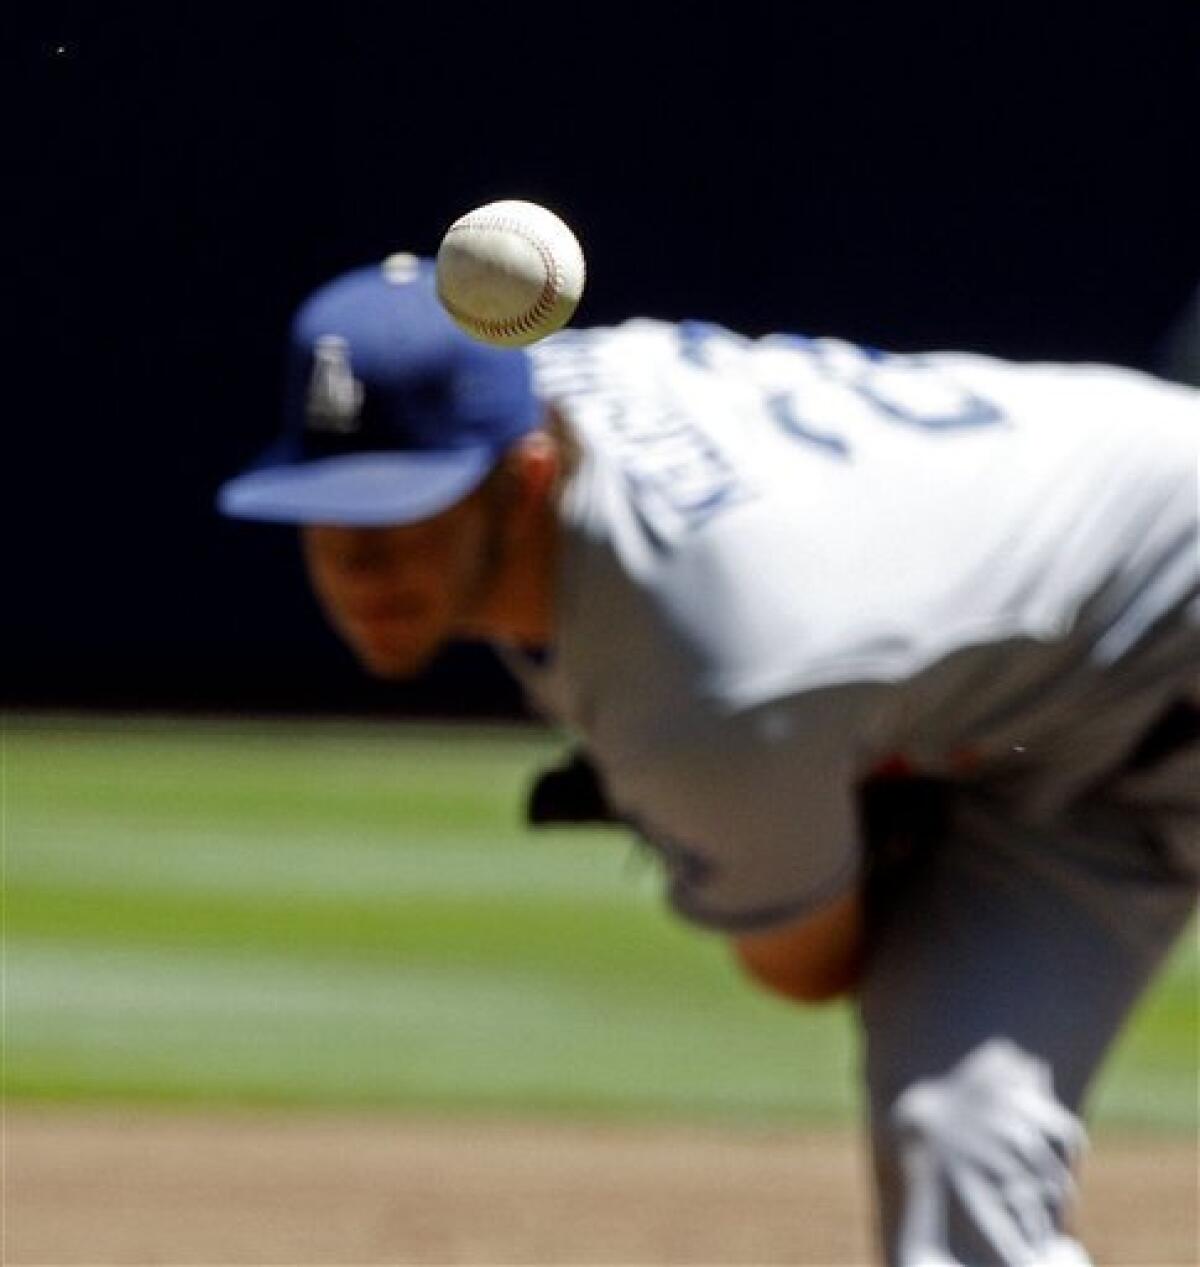 Hudson hits 2 HRs, Kershaw dominant for Dodgers - The San Diego